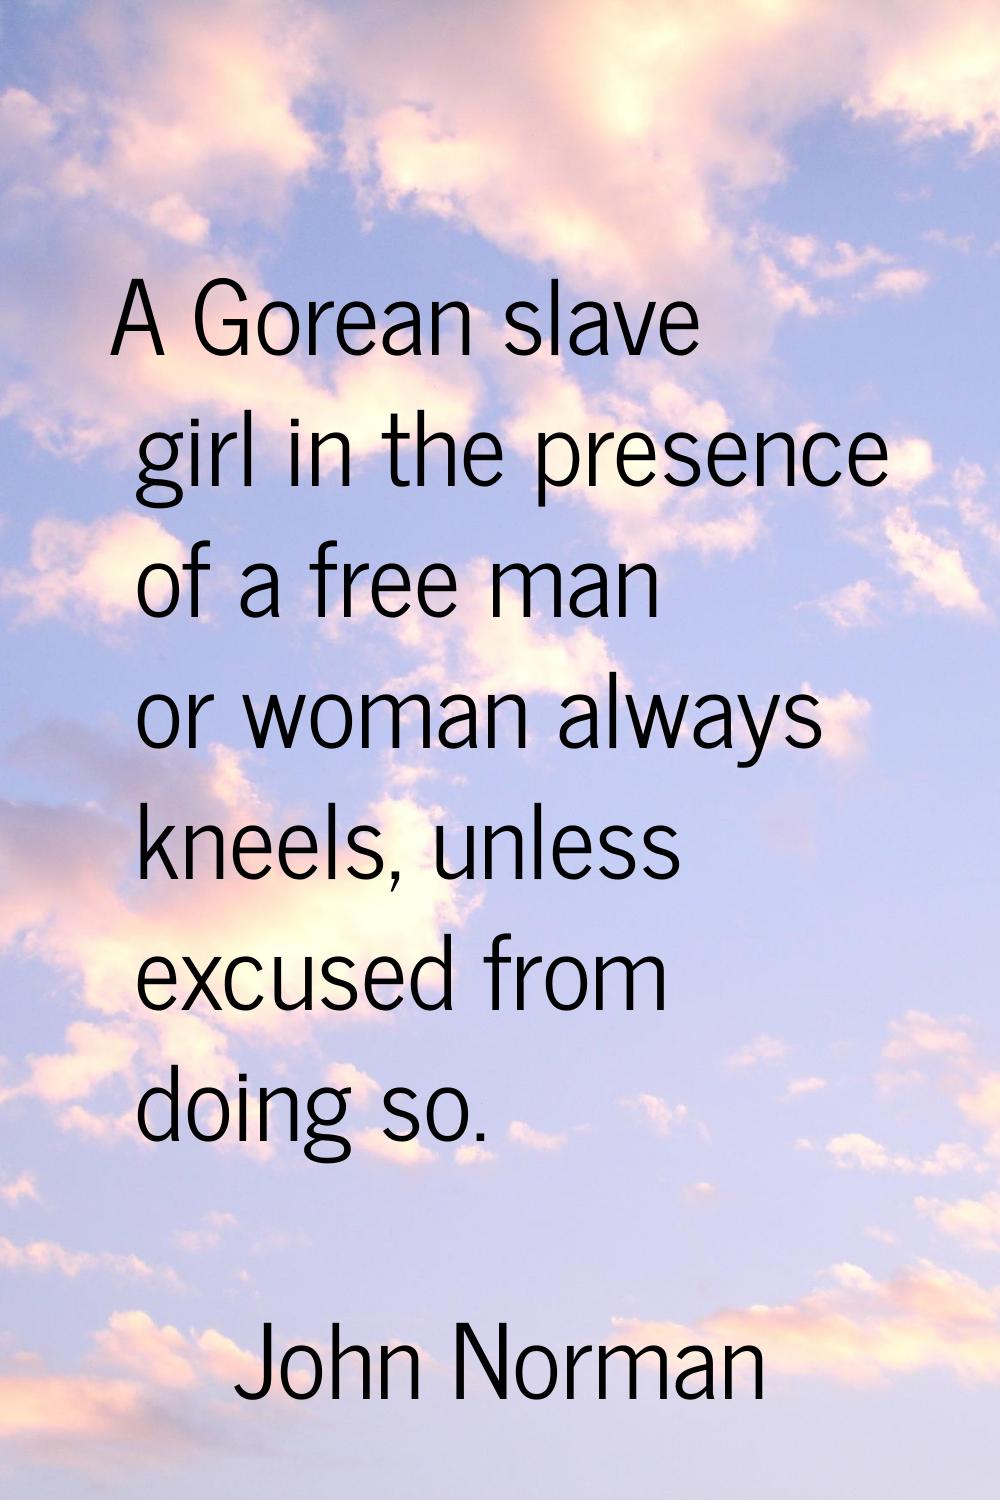 A Gorean slave girl in the presence of a free man or woman always kneels, unless excused from doing